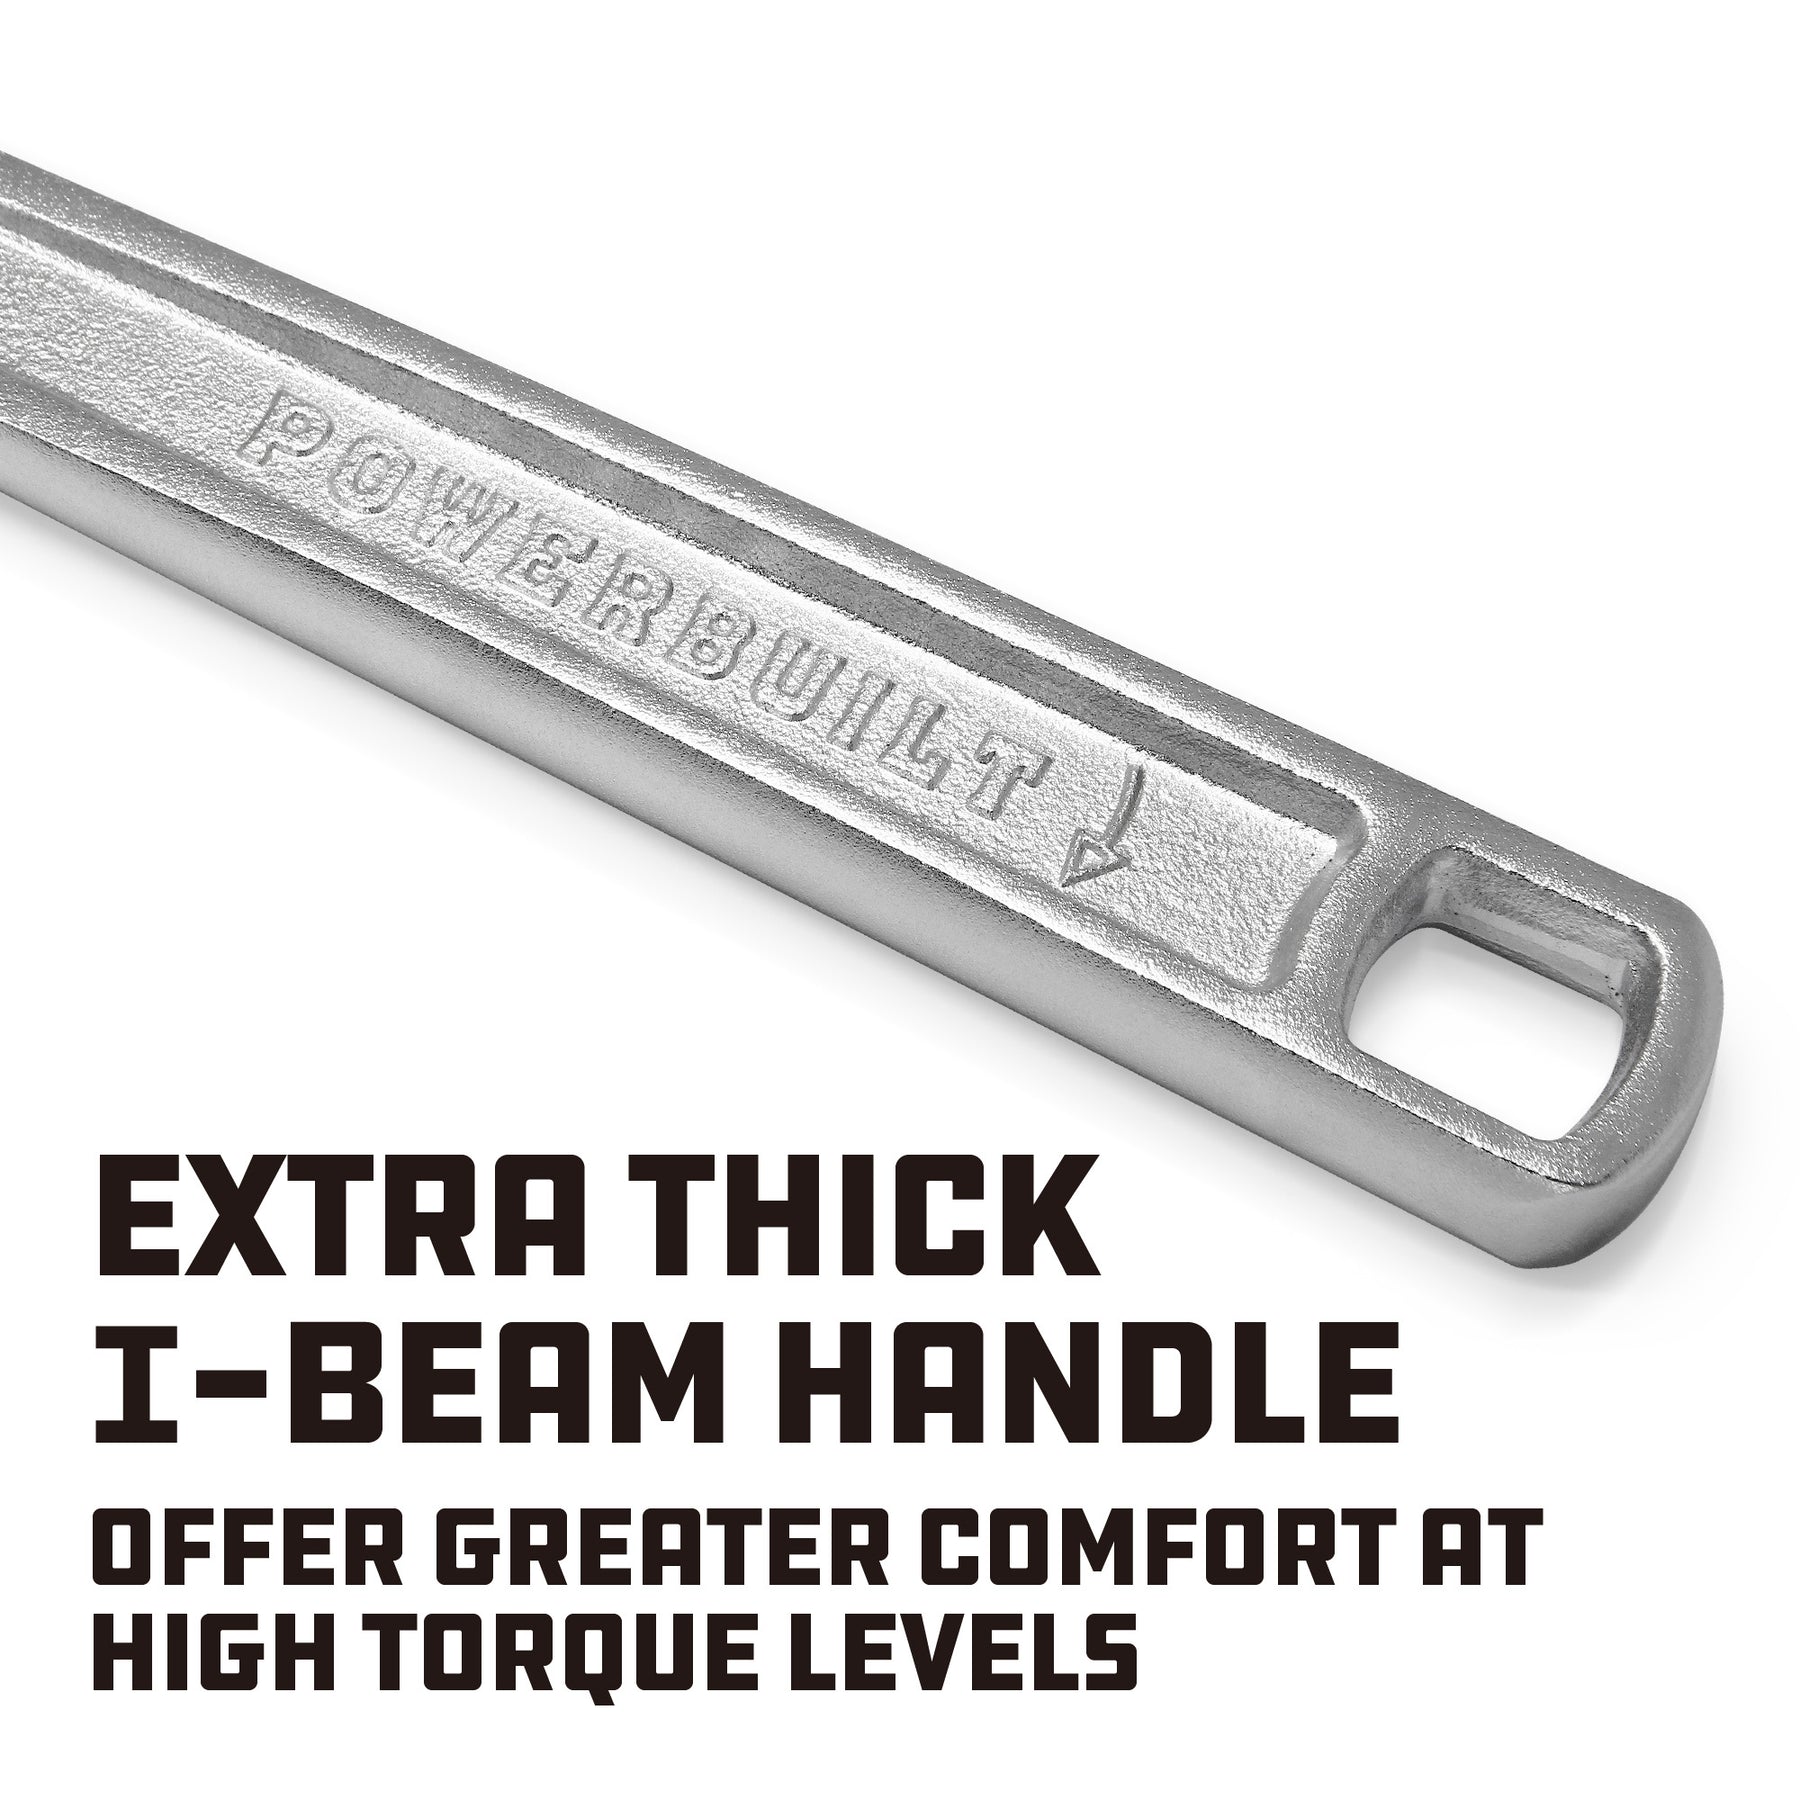 8 in. Adjustable Wrench